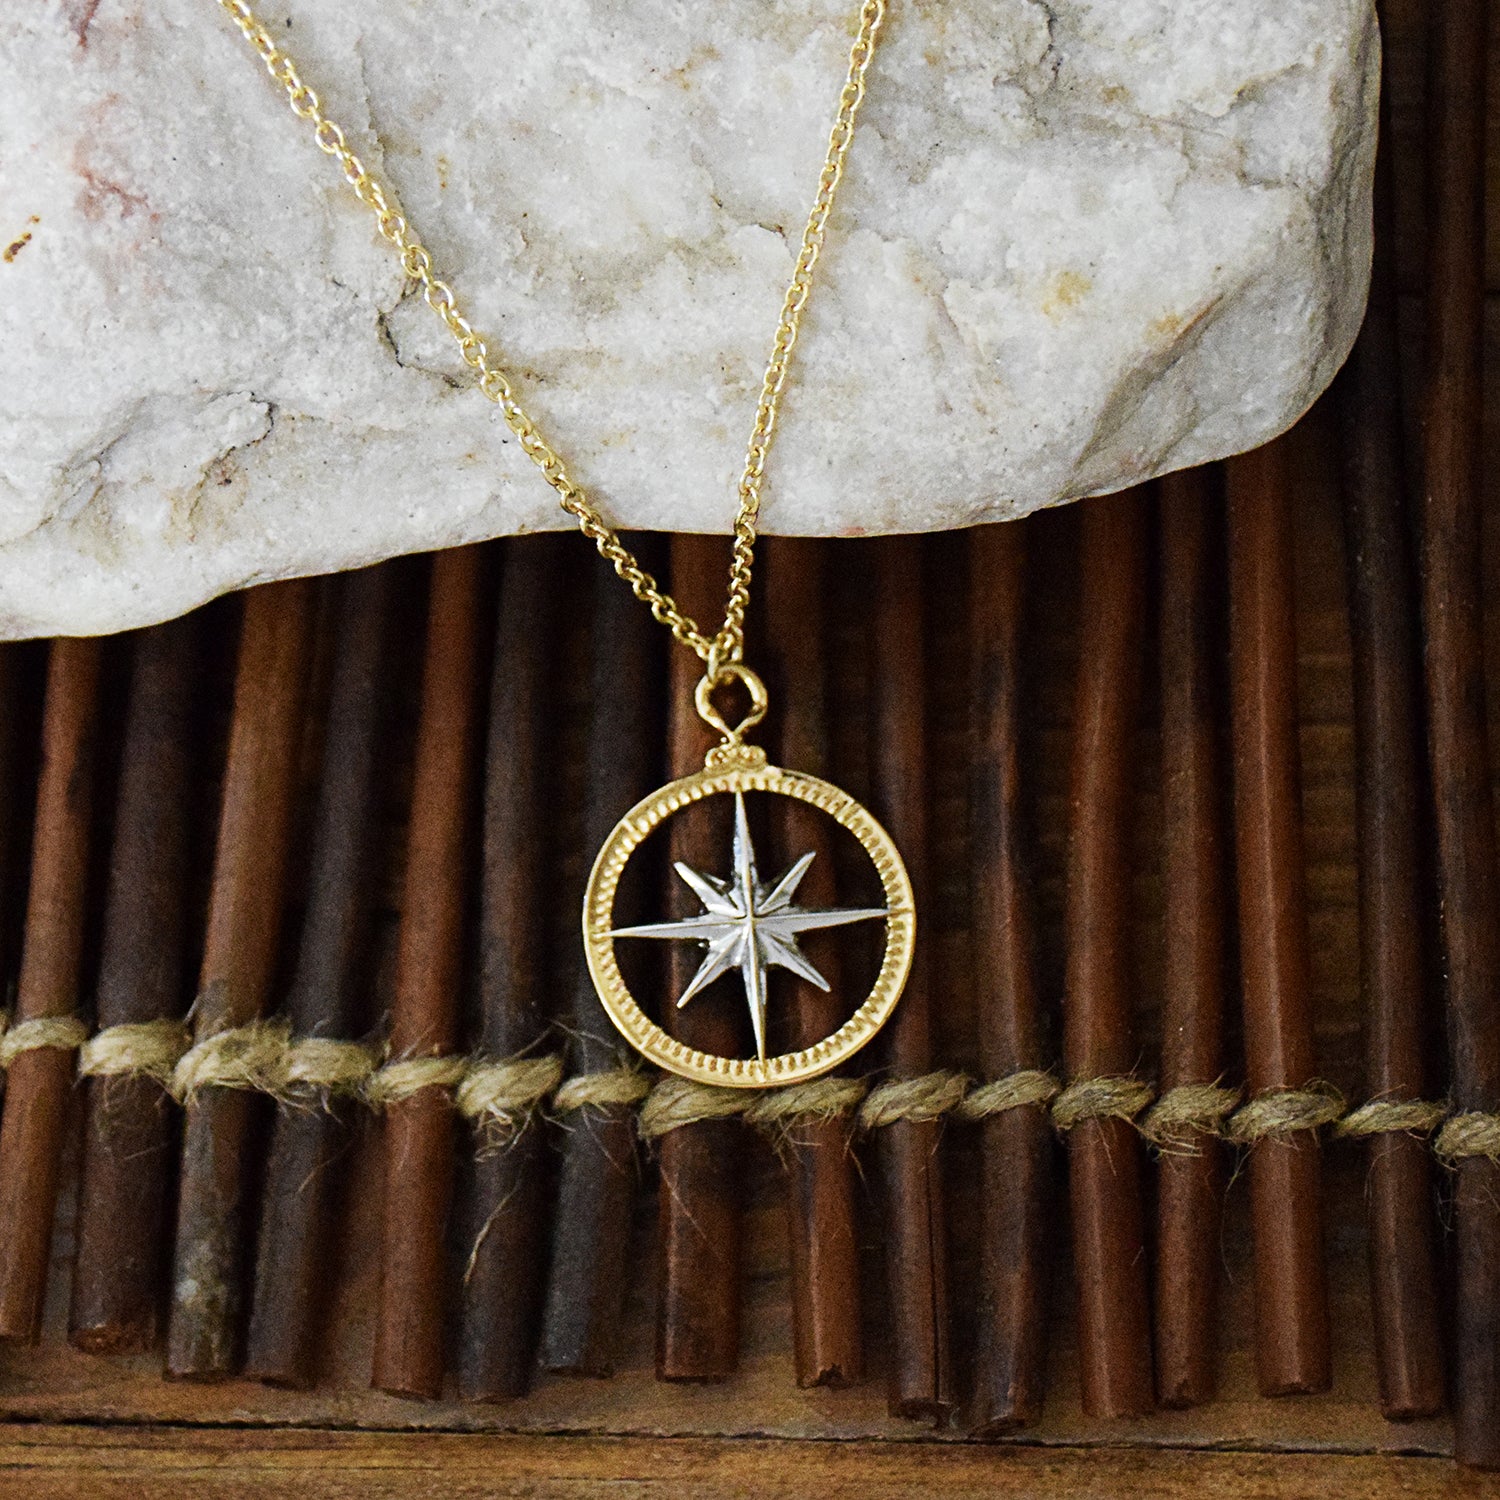 Real 925 Silver / 14k Gold Plated North Star Compass Medallion Pendant  Necklace